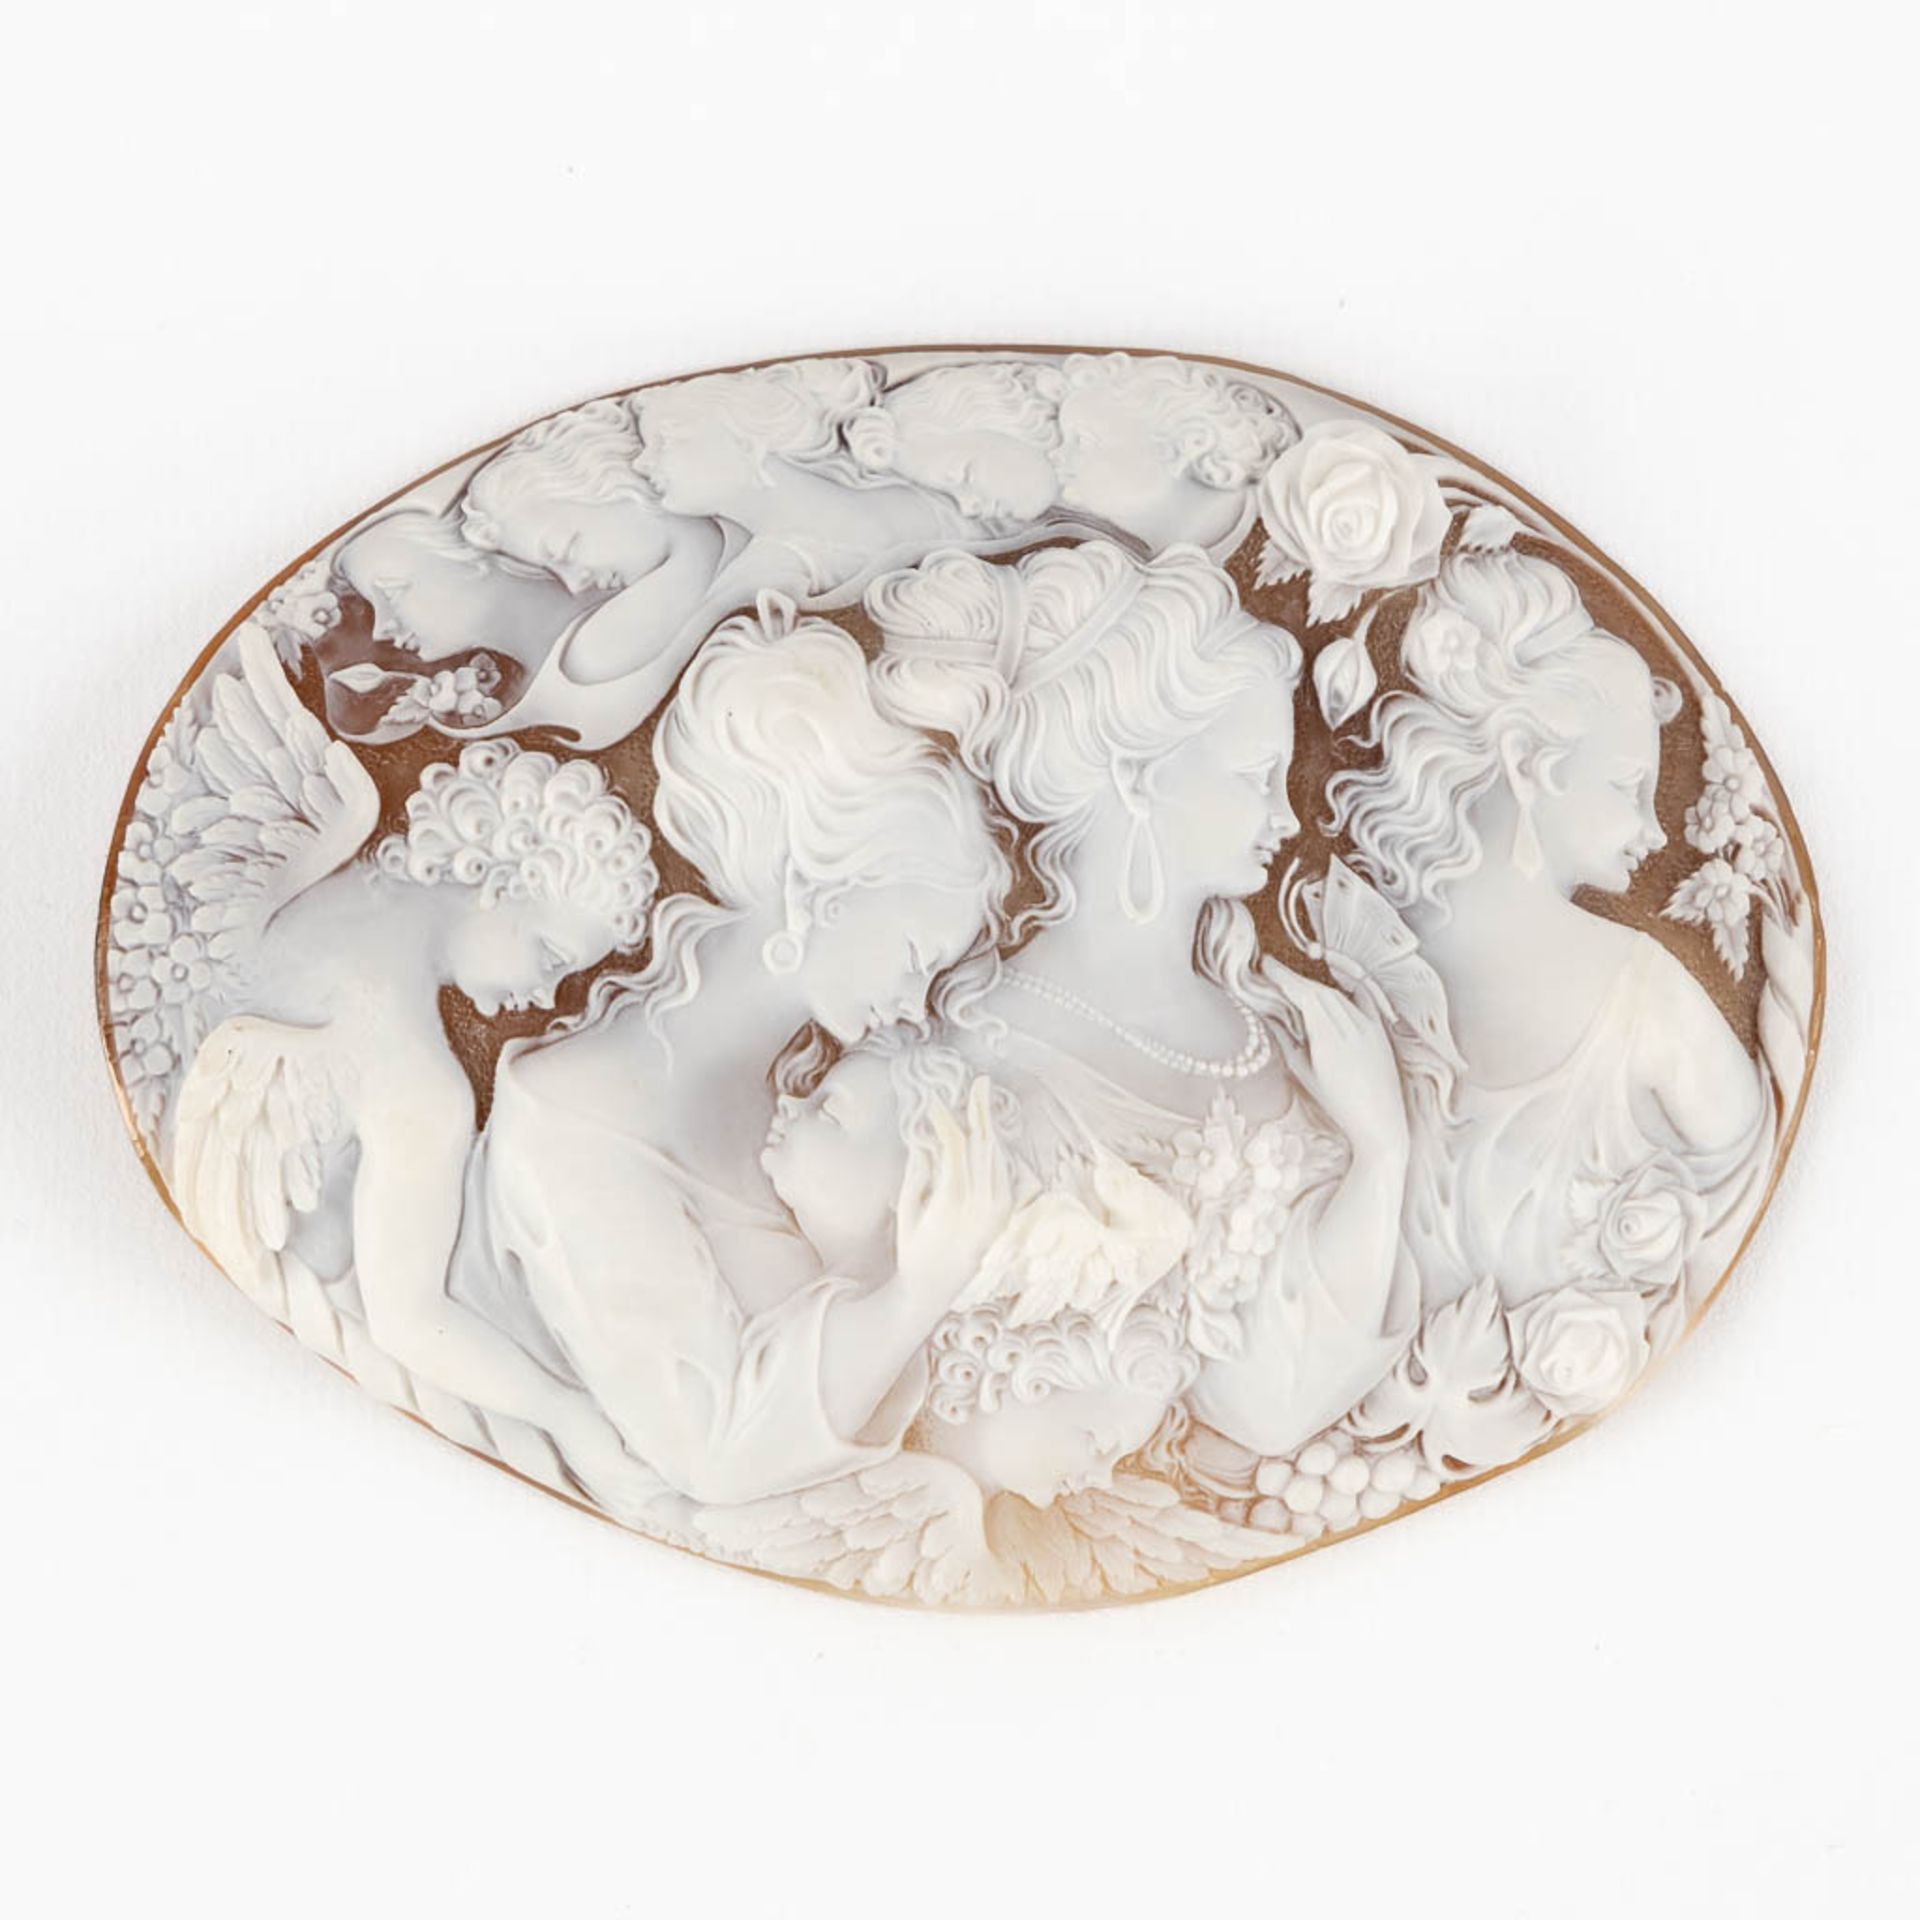 A Cameo, finely sculptured images of Three Graces, Angels and floral decor. (W: 9 x H:12,5 cm)